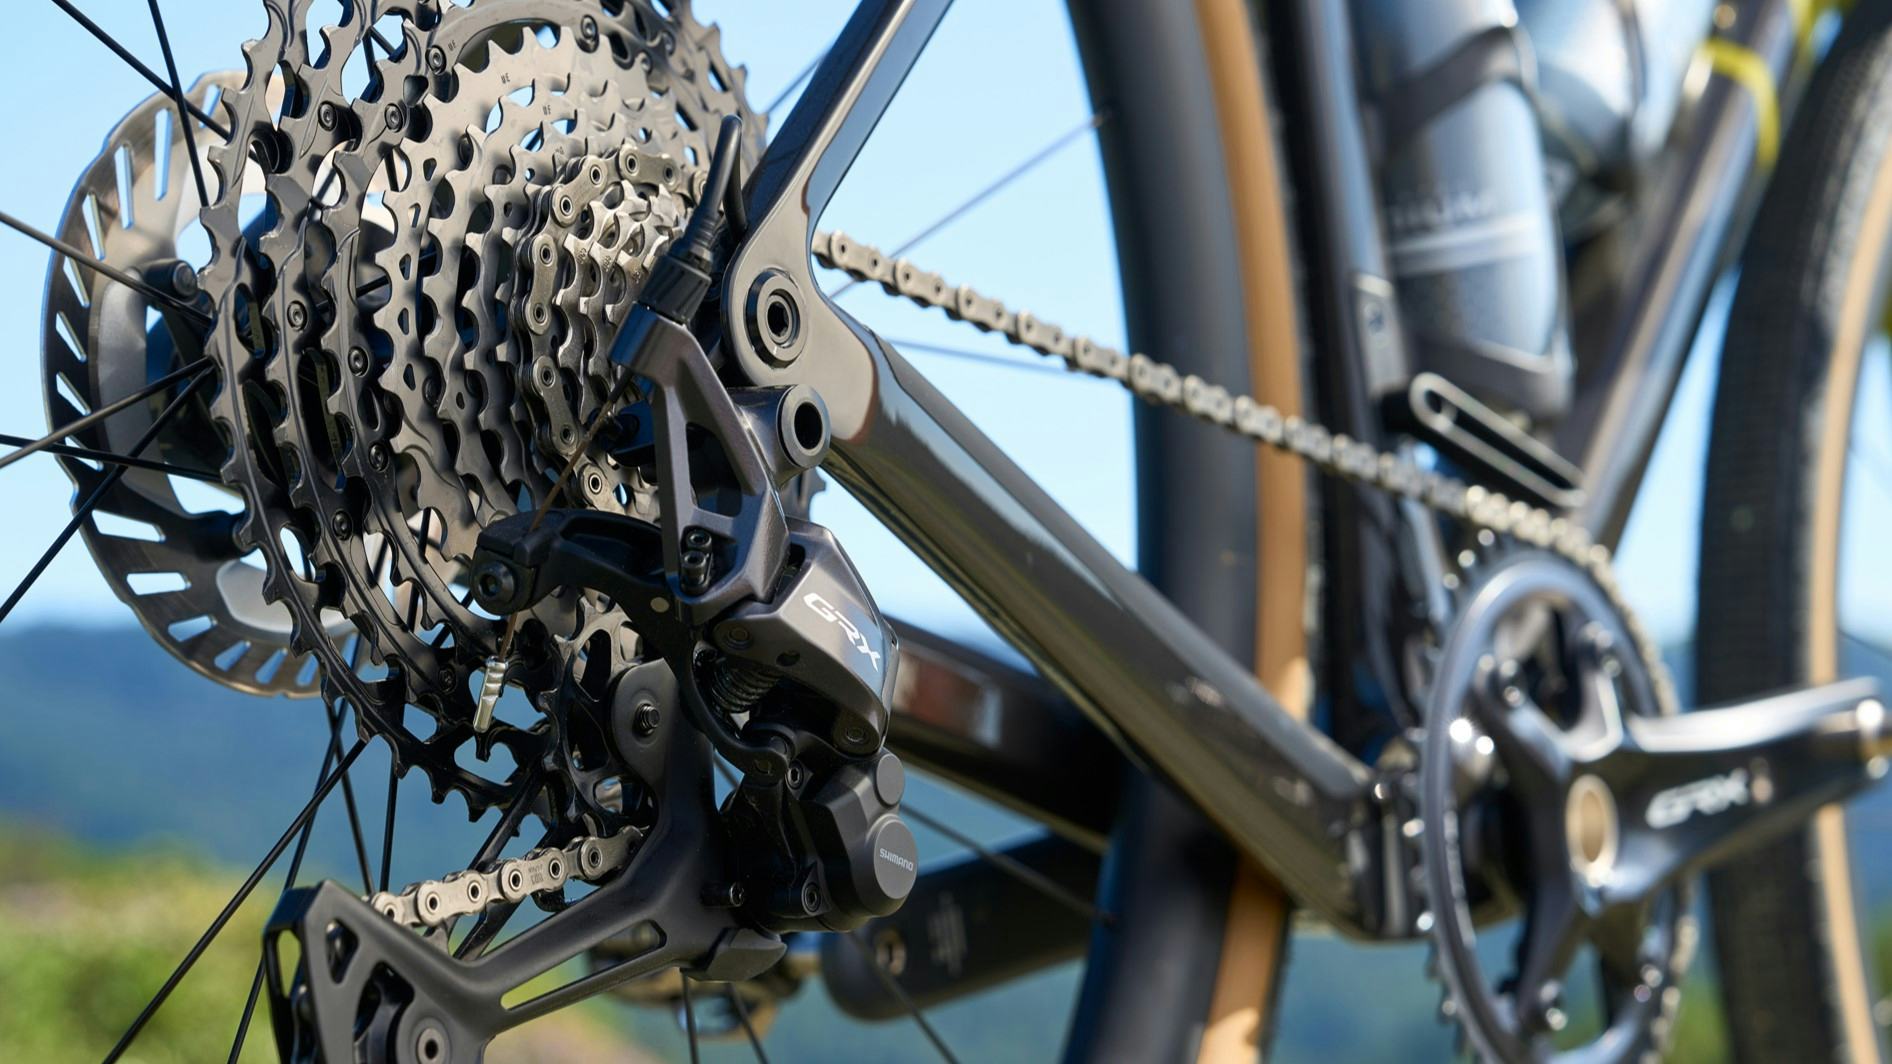 For Shimano the outlook remains rather uncertain due to the high inventories. – Photo Shimano